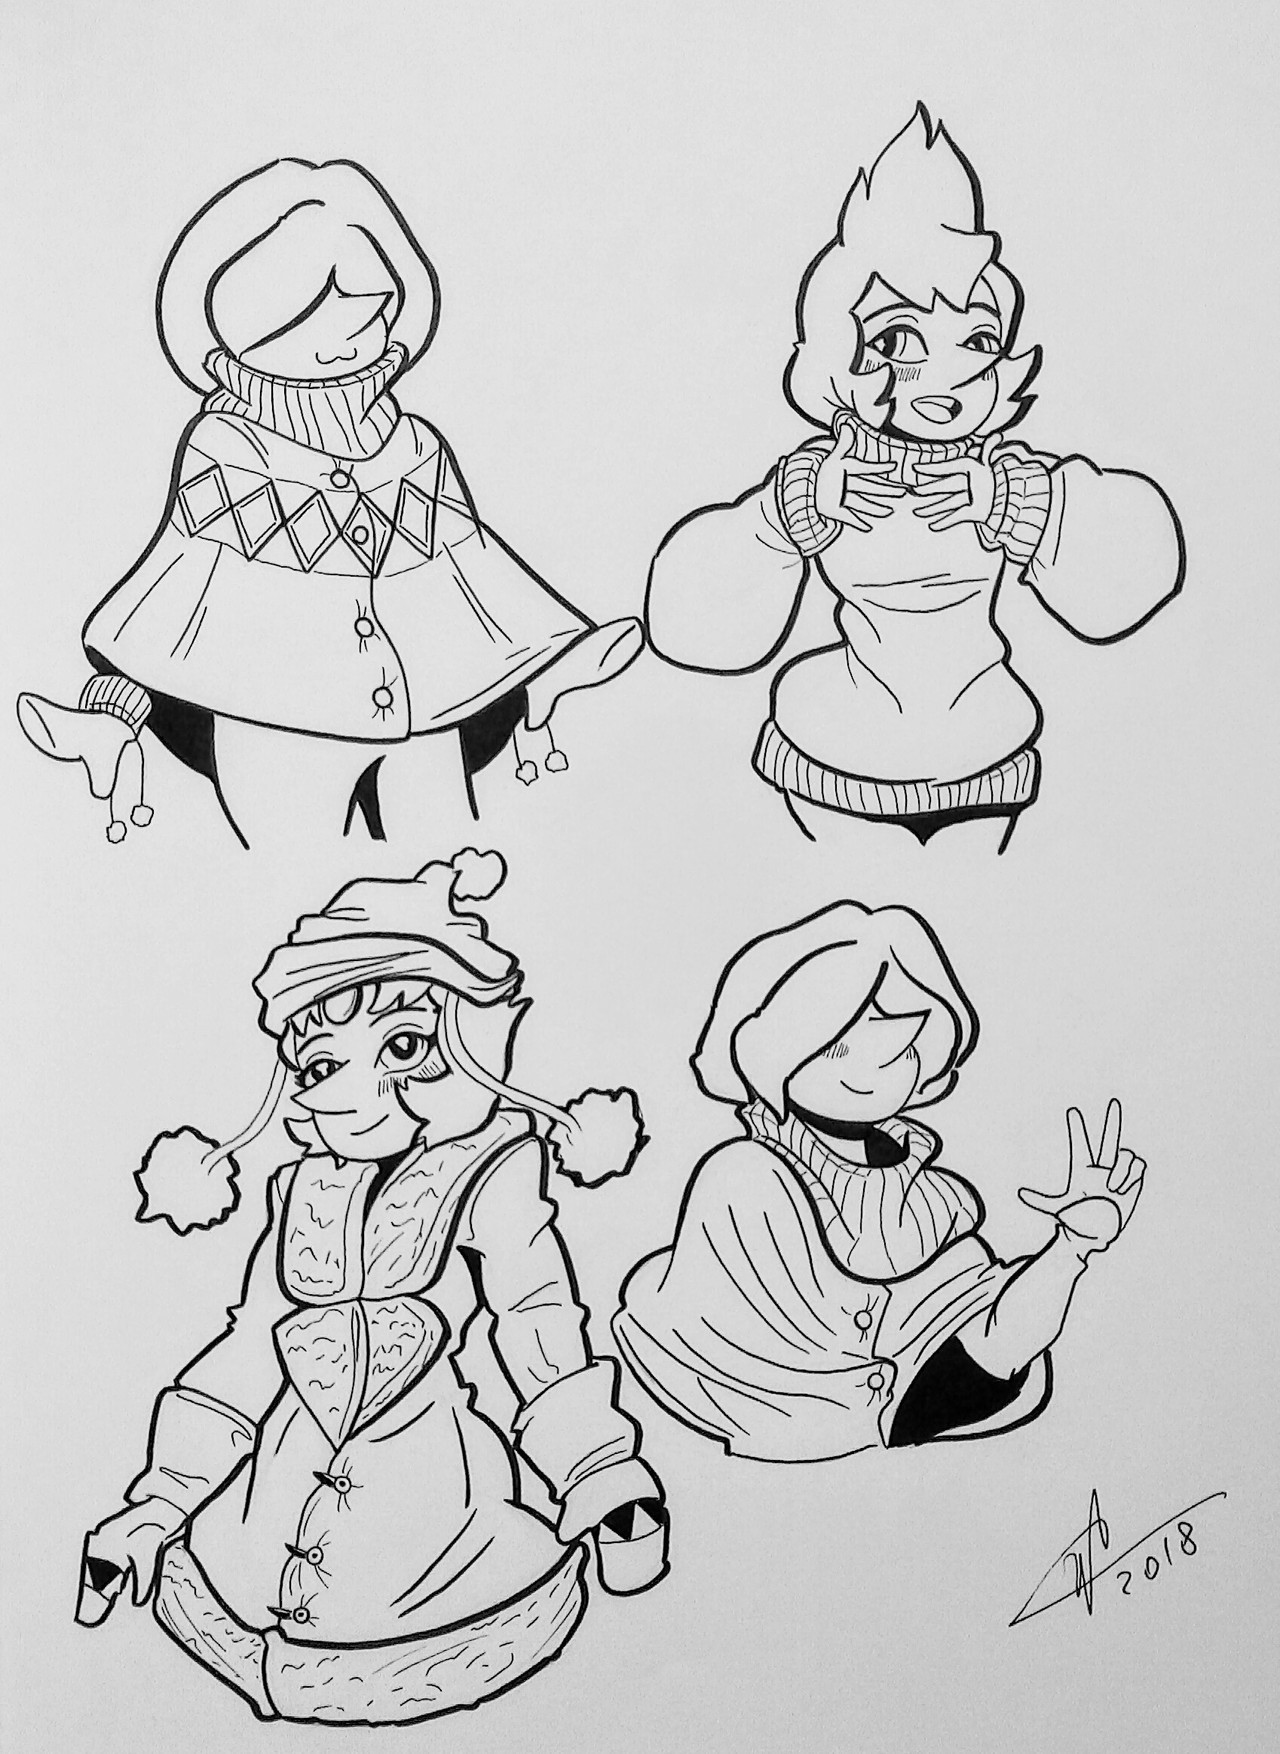 Its really cold and snowy outside. So i decided to draw some pearls.